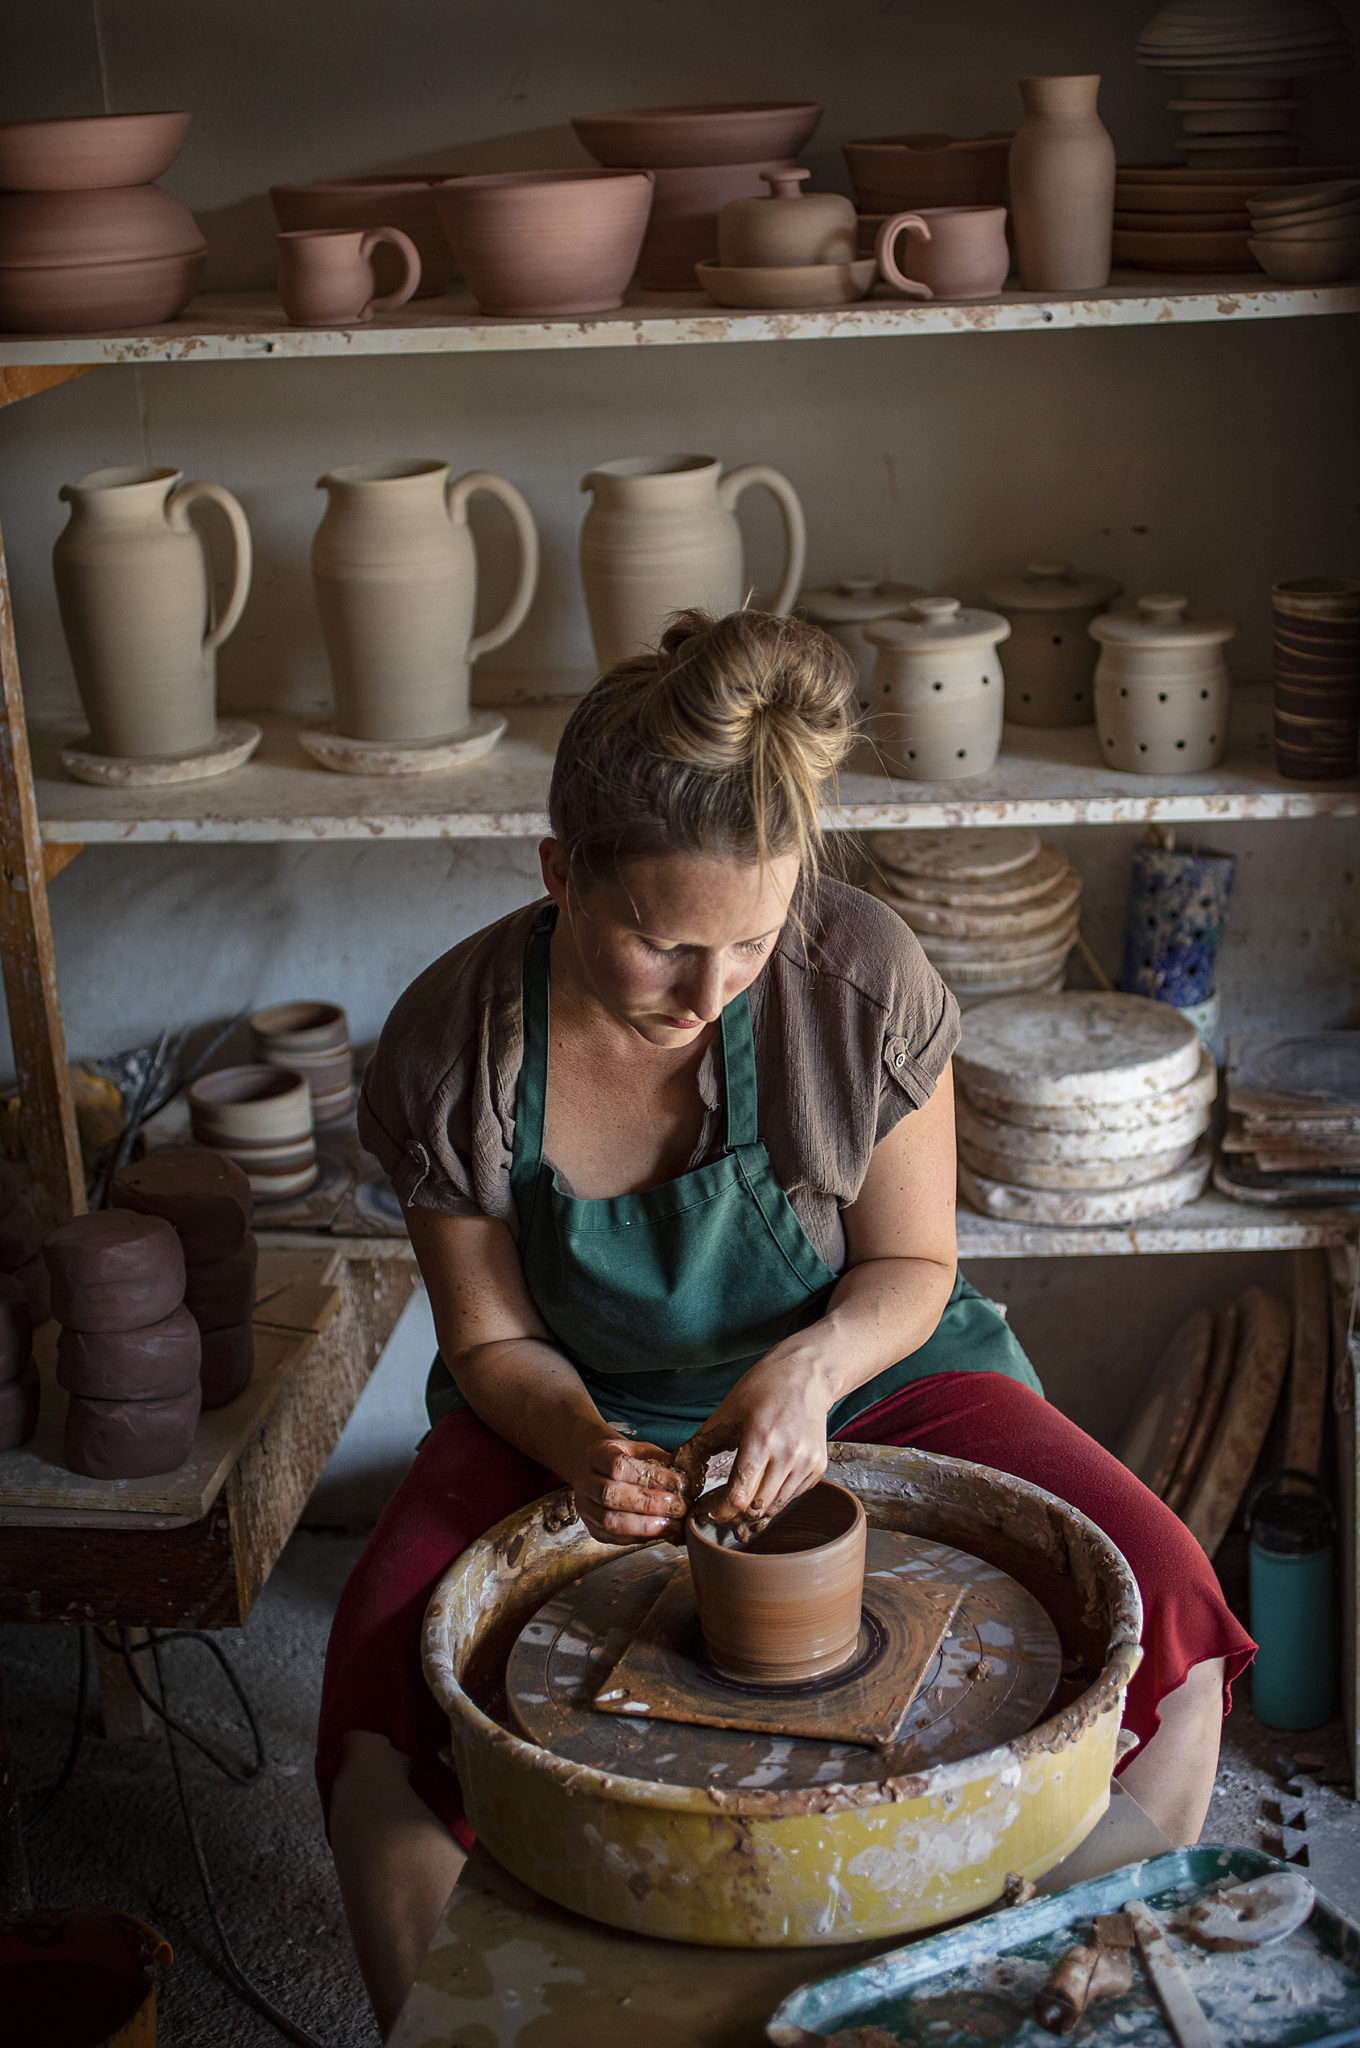 Stephanie Gwilliam throws mugs on a wheel in her Hayes Ceramics studio in Windsor on Tuesday, September 15, 2020. (Photo by John Burgess/The Press Democrat)